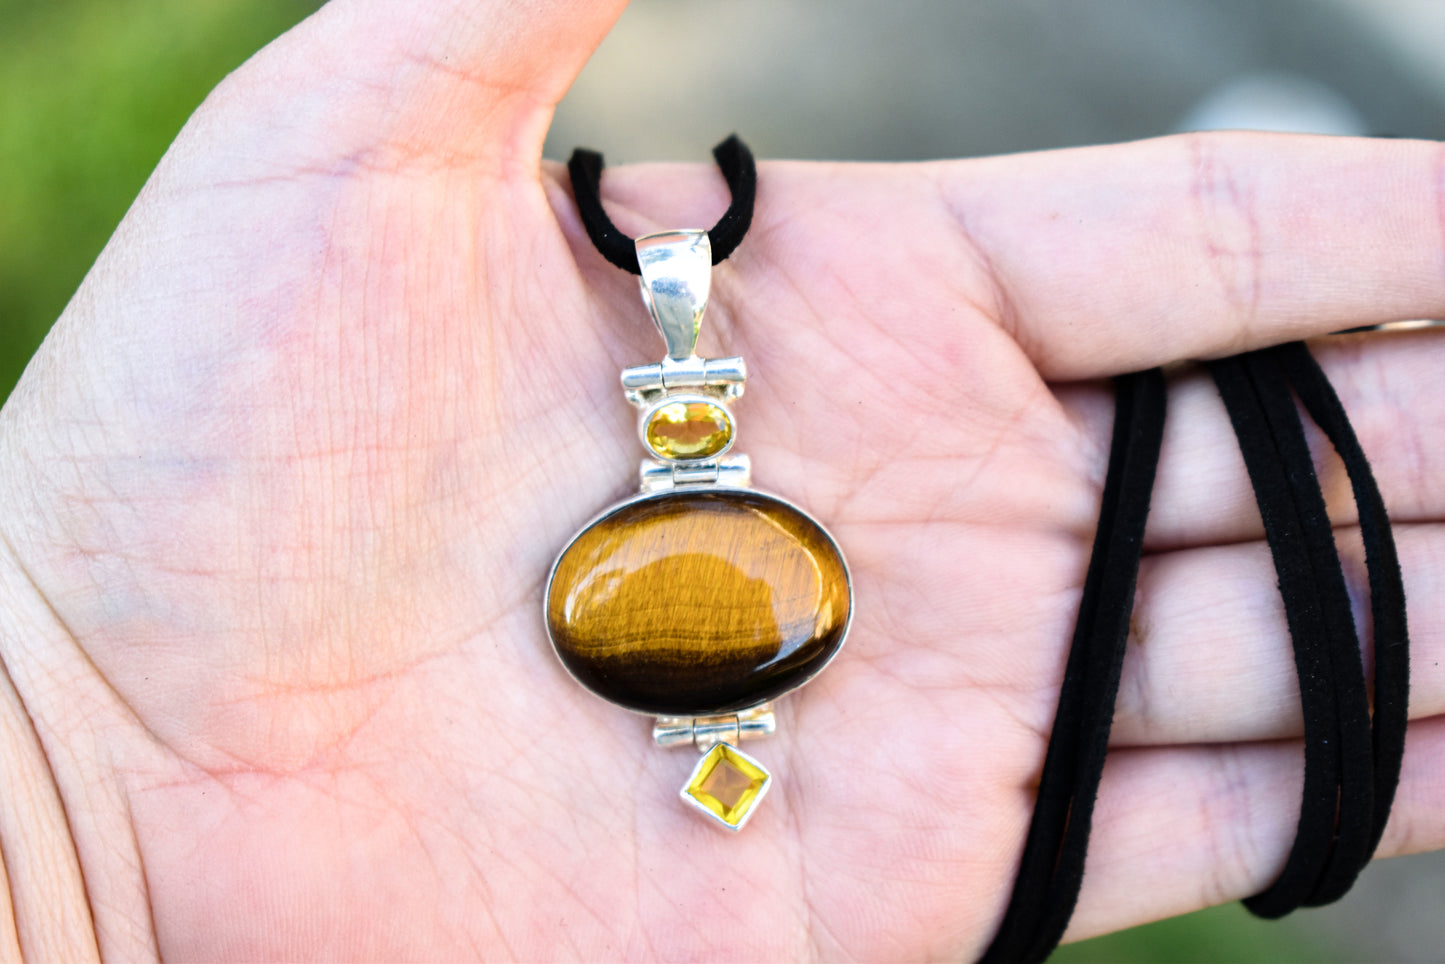 Tigers Eye and Citrine Necklace